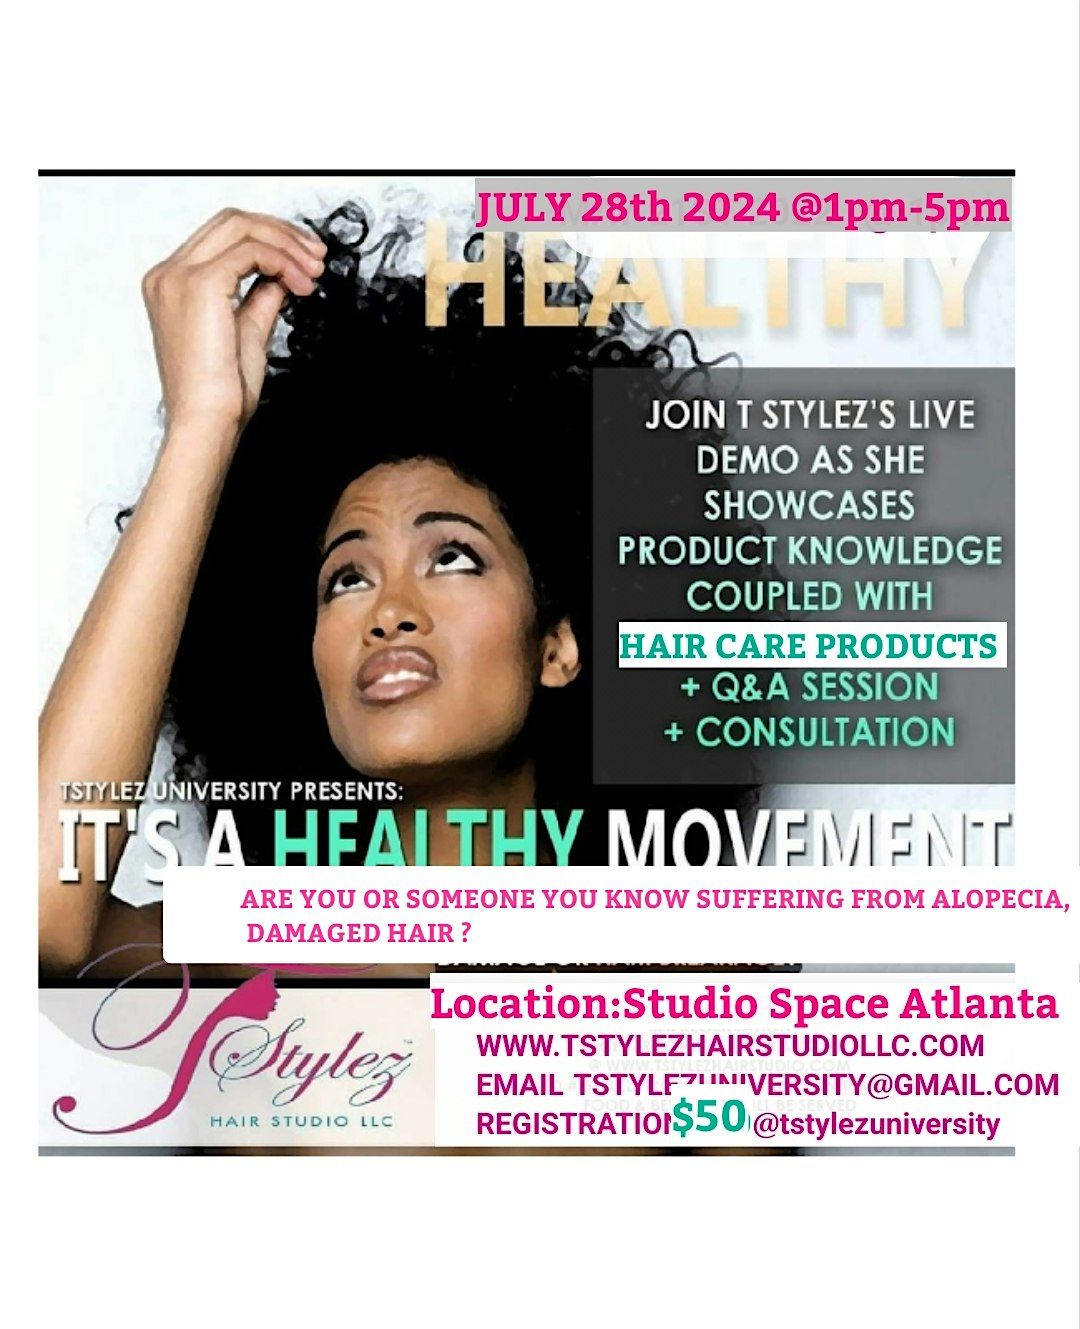 IT'S A HEALTHY MOVEMENT !Are You Suffering From Alopecia\/Damaged Hair?